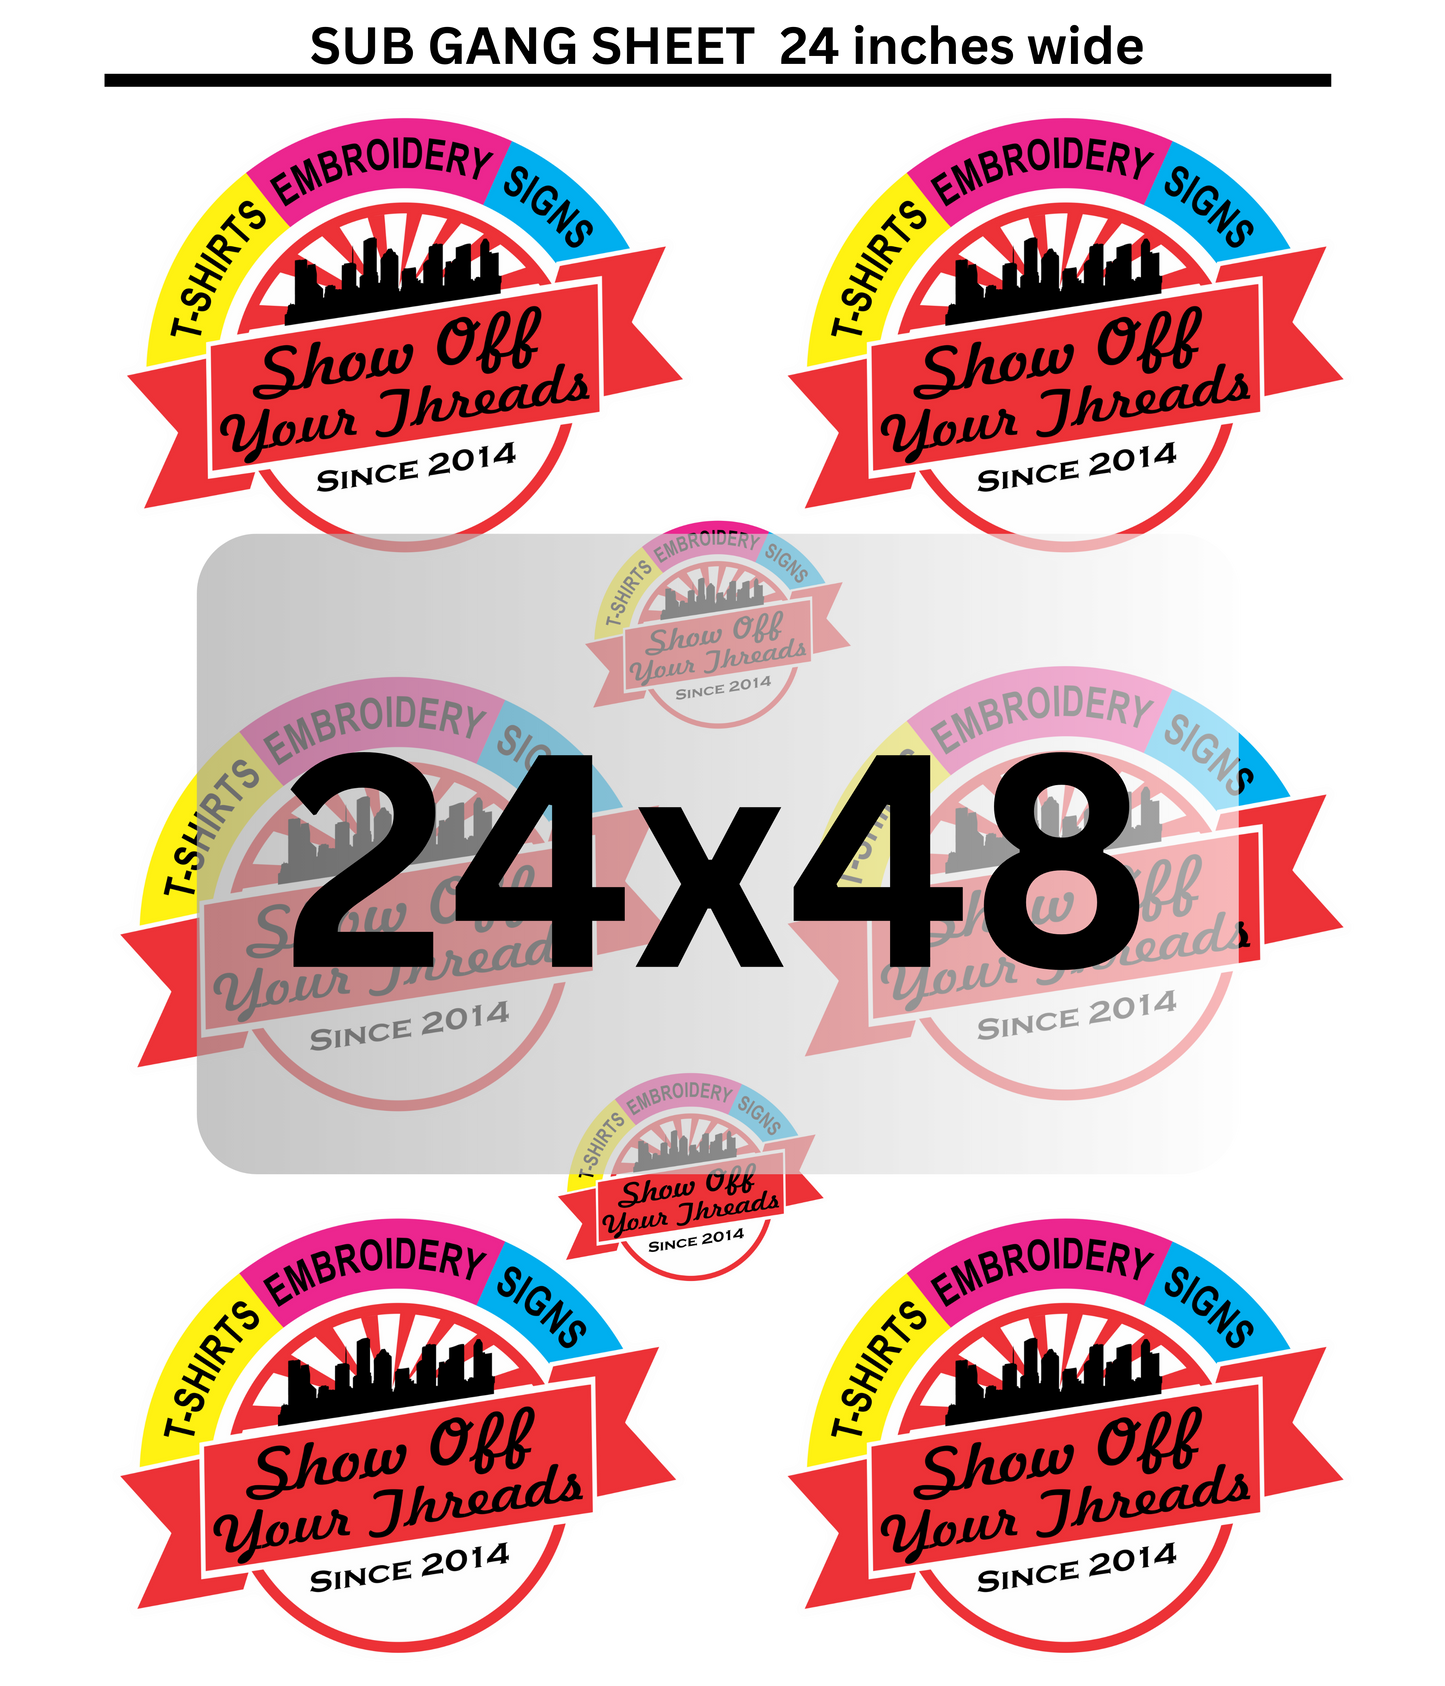 Image displaying multiple colorful labels for Show Off Your Threads' SUBLIMATION TRANSFER GANG SHEET BUILD YOUR OWN custom embroidery and signs business, showcasing their products like t-shirts and signs. Central label notes the size "24x48".